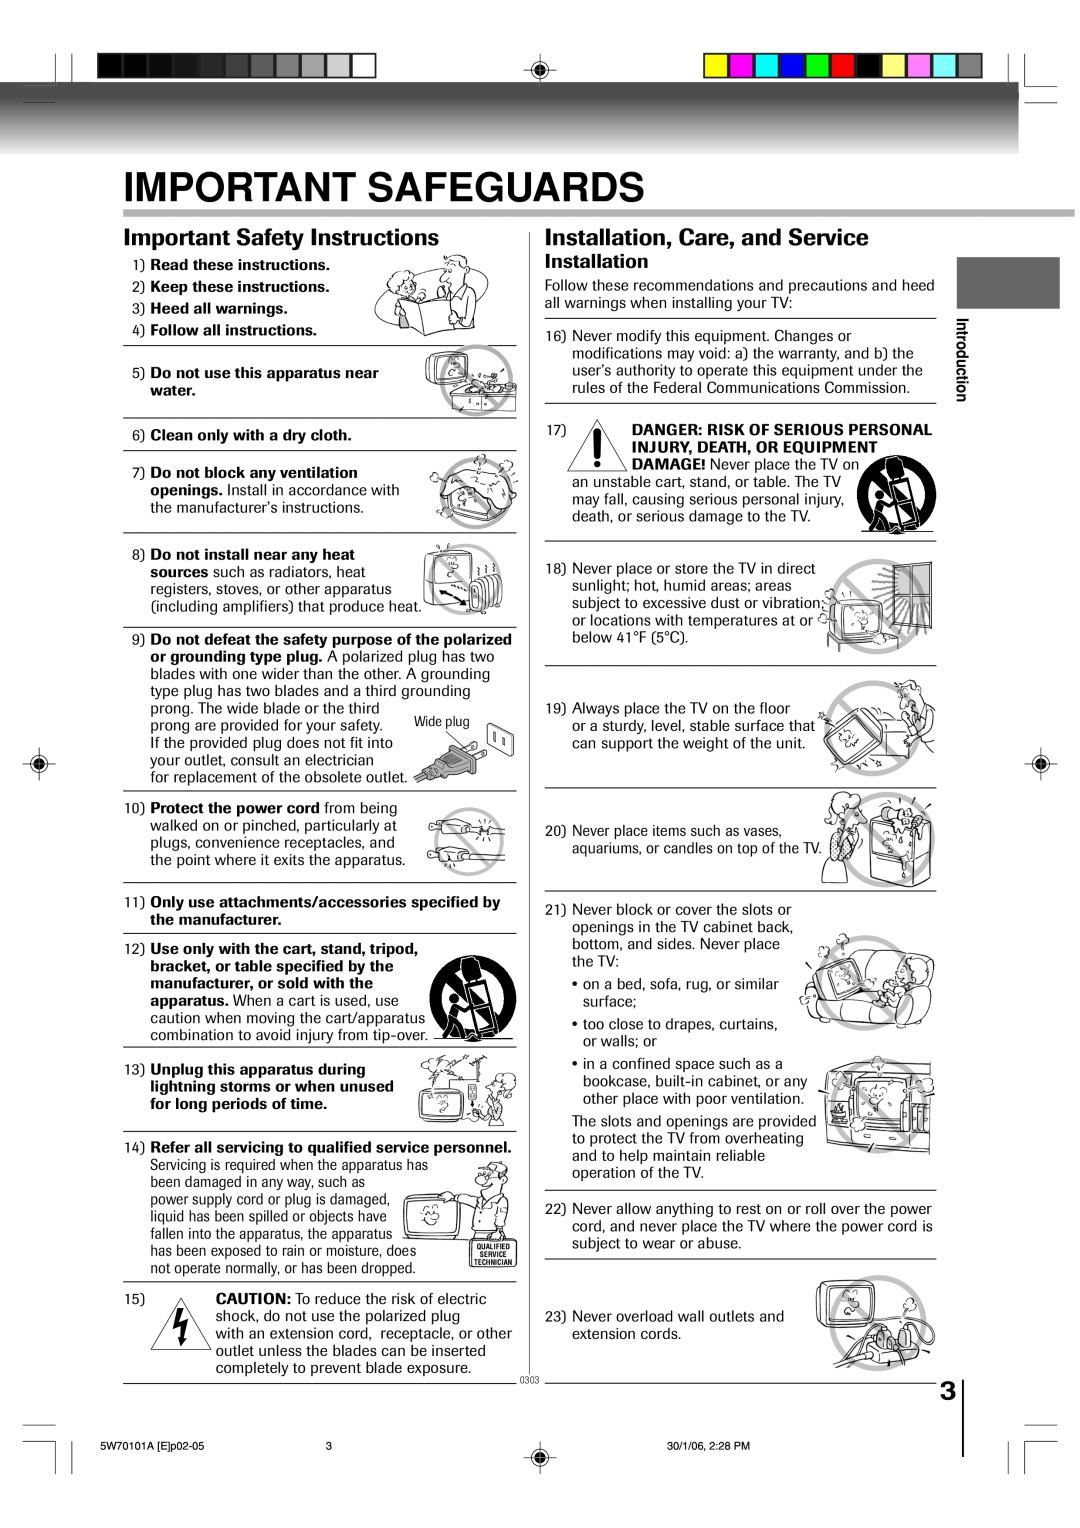 Toshiba MW20F52, MW24F52 owner manual Important Safety Instructions, Installation, Care, and Service, Important Safeguards 